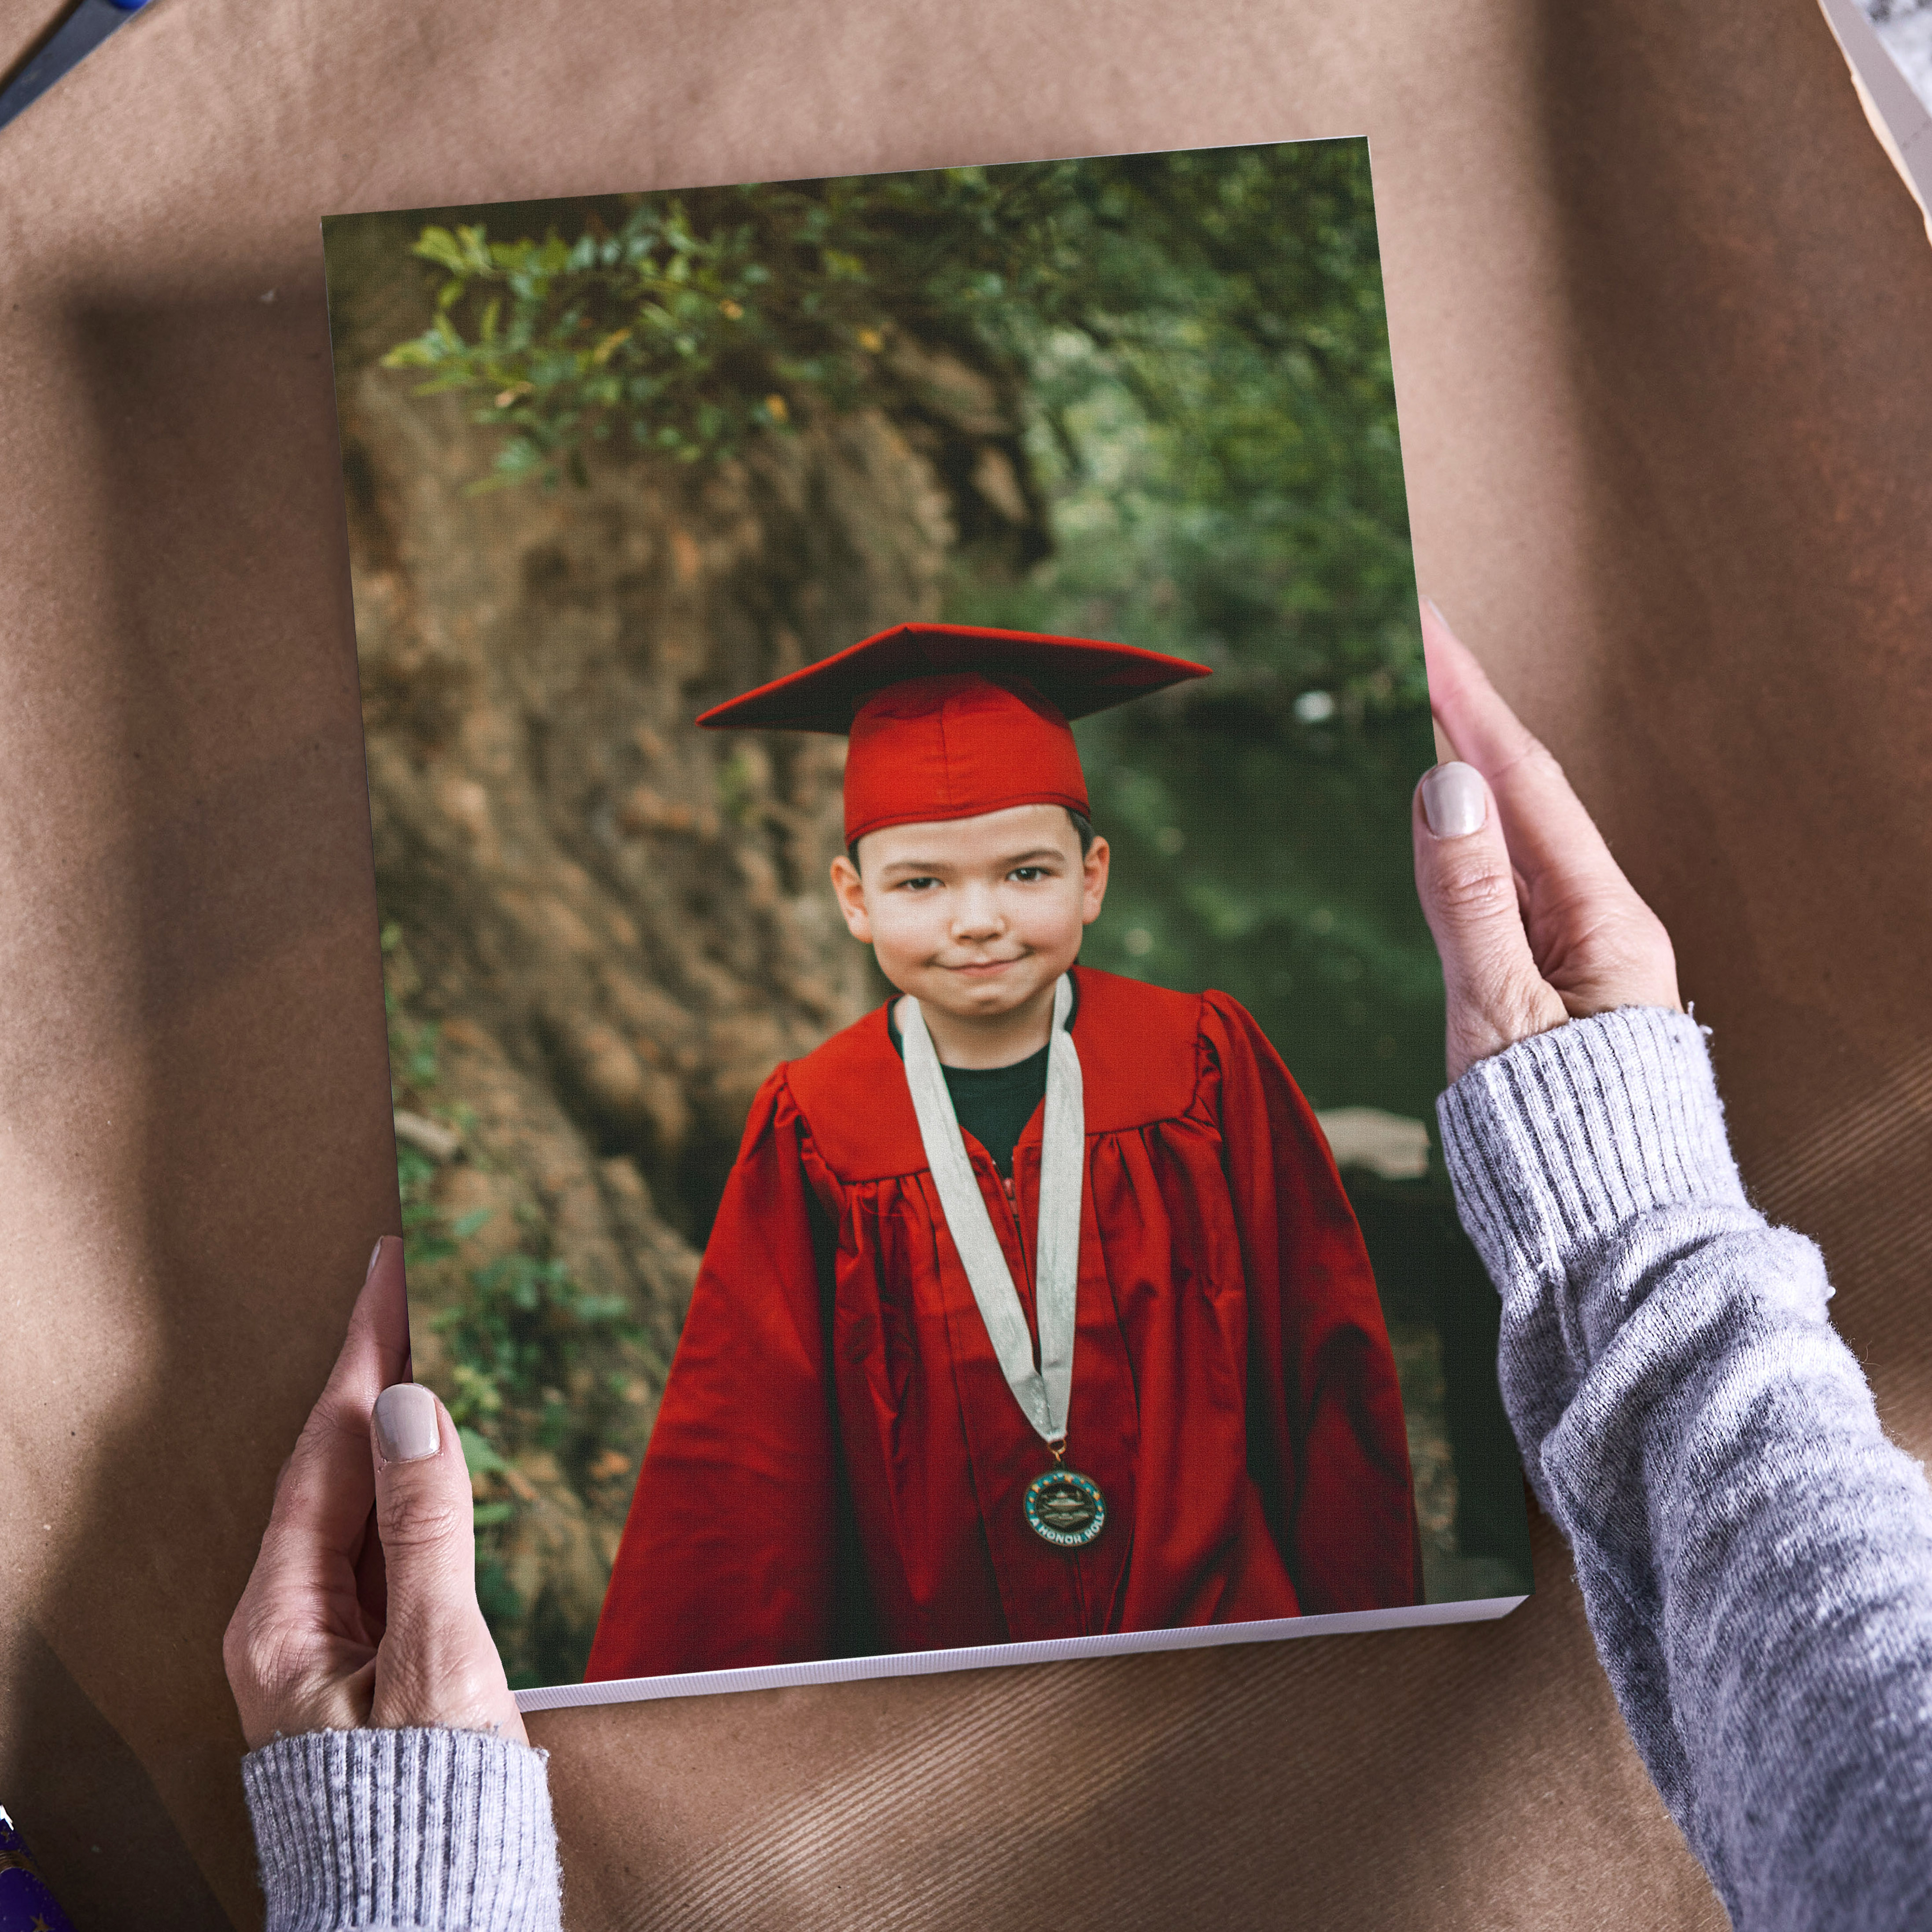 Capture those special moments on camera and print those specialphotos onto canvas to display in your home and create your own custom home decor or give as personalised gifts for your loved ones